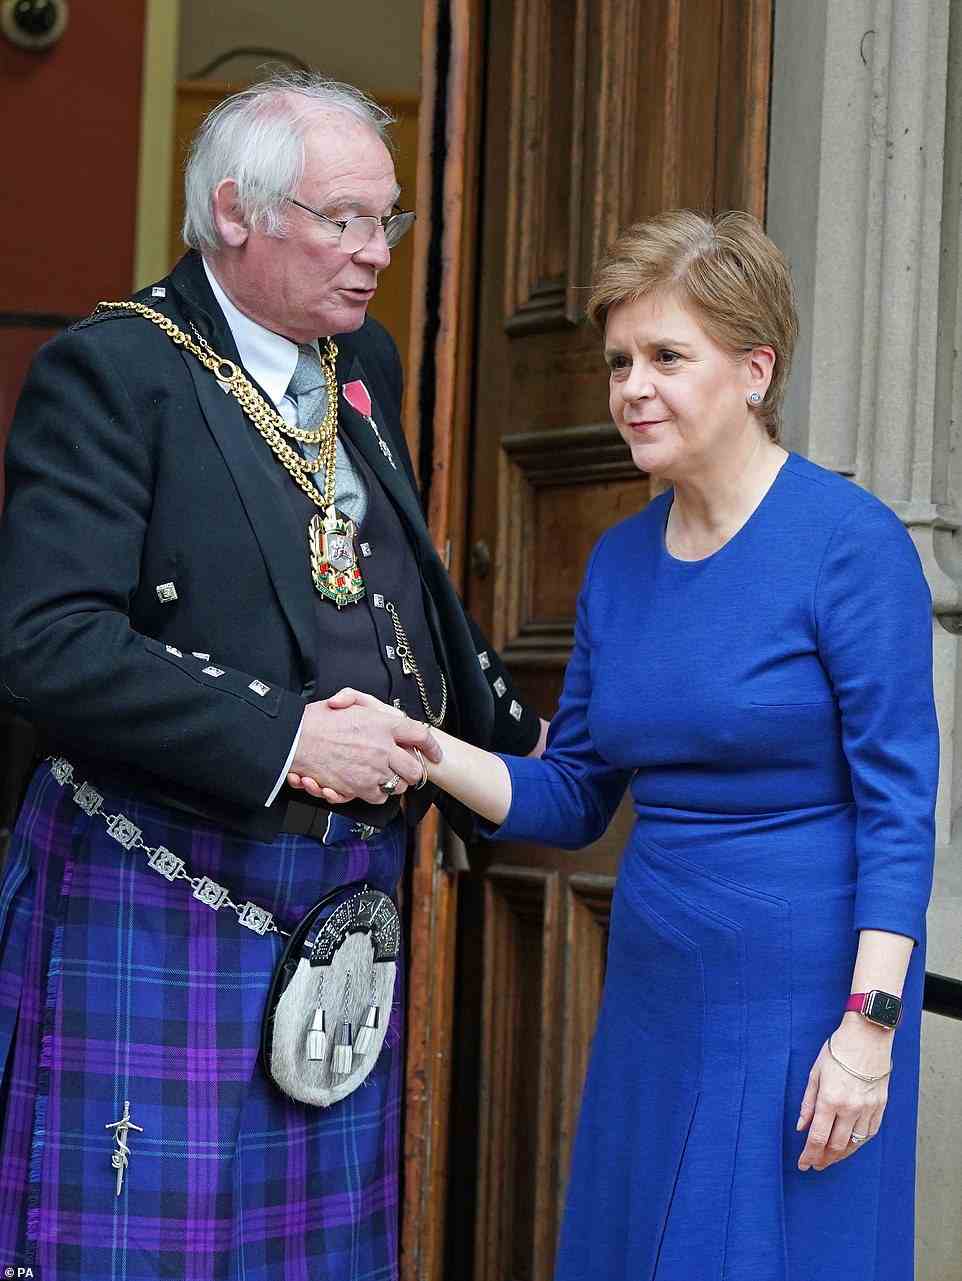 First Minister Nicola Sturgeon is greeted by Lord Provost of Dunfermline Jim Leishman as she arrives at the City Chambers in Dunfermline. There were cheers and boos